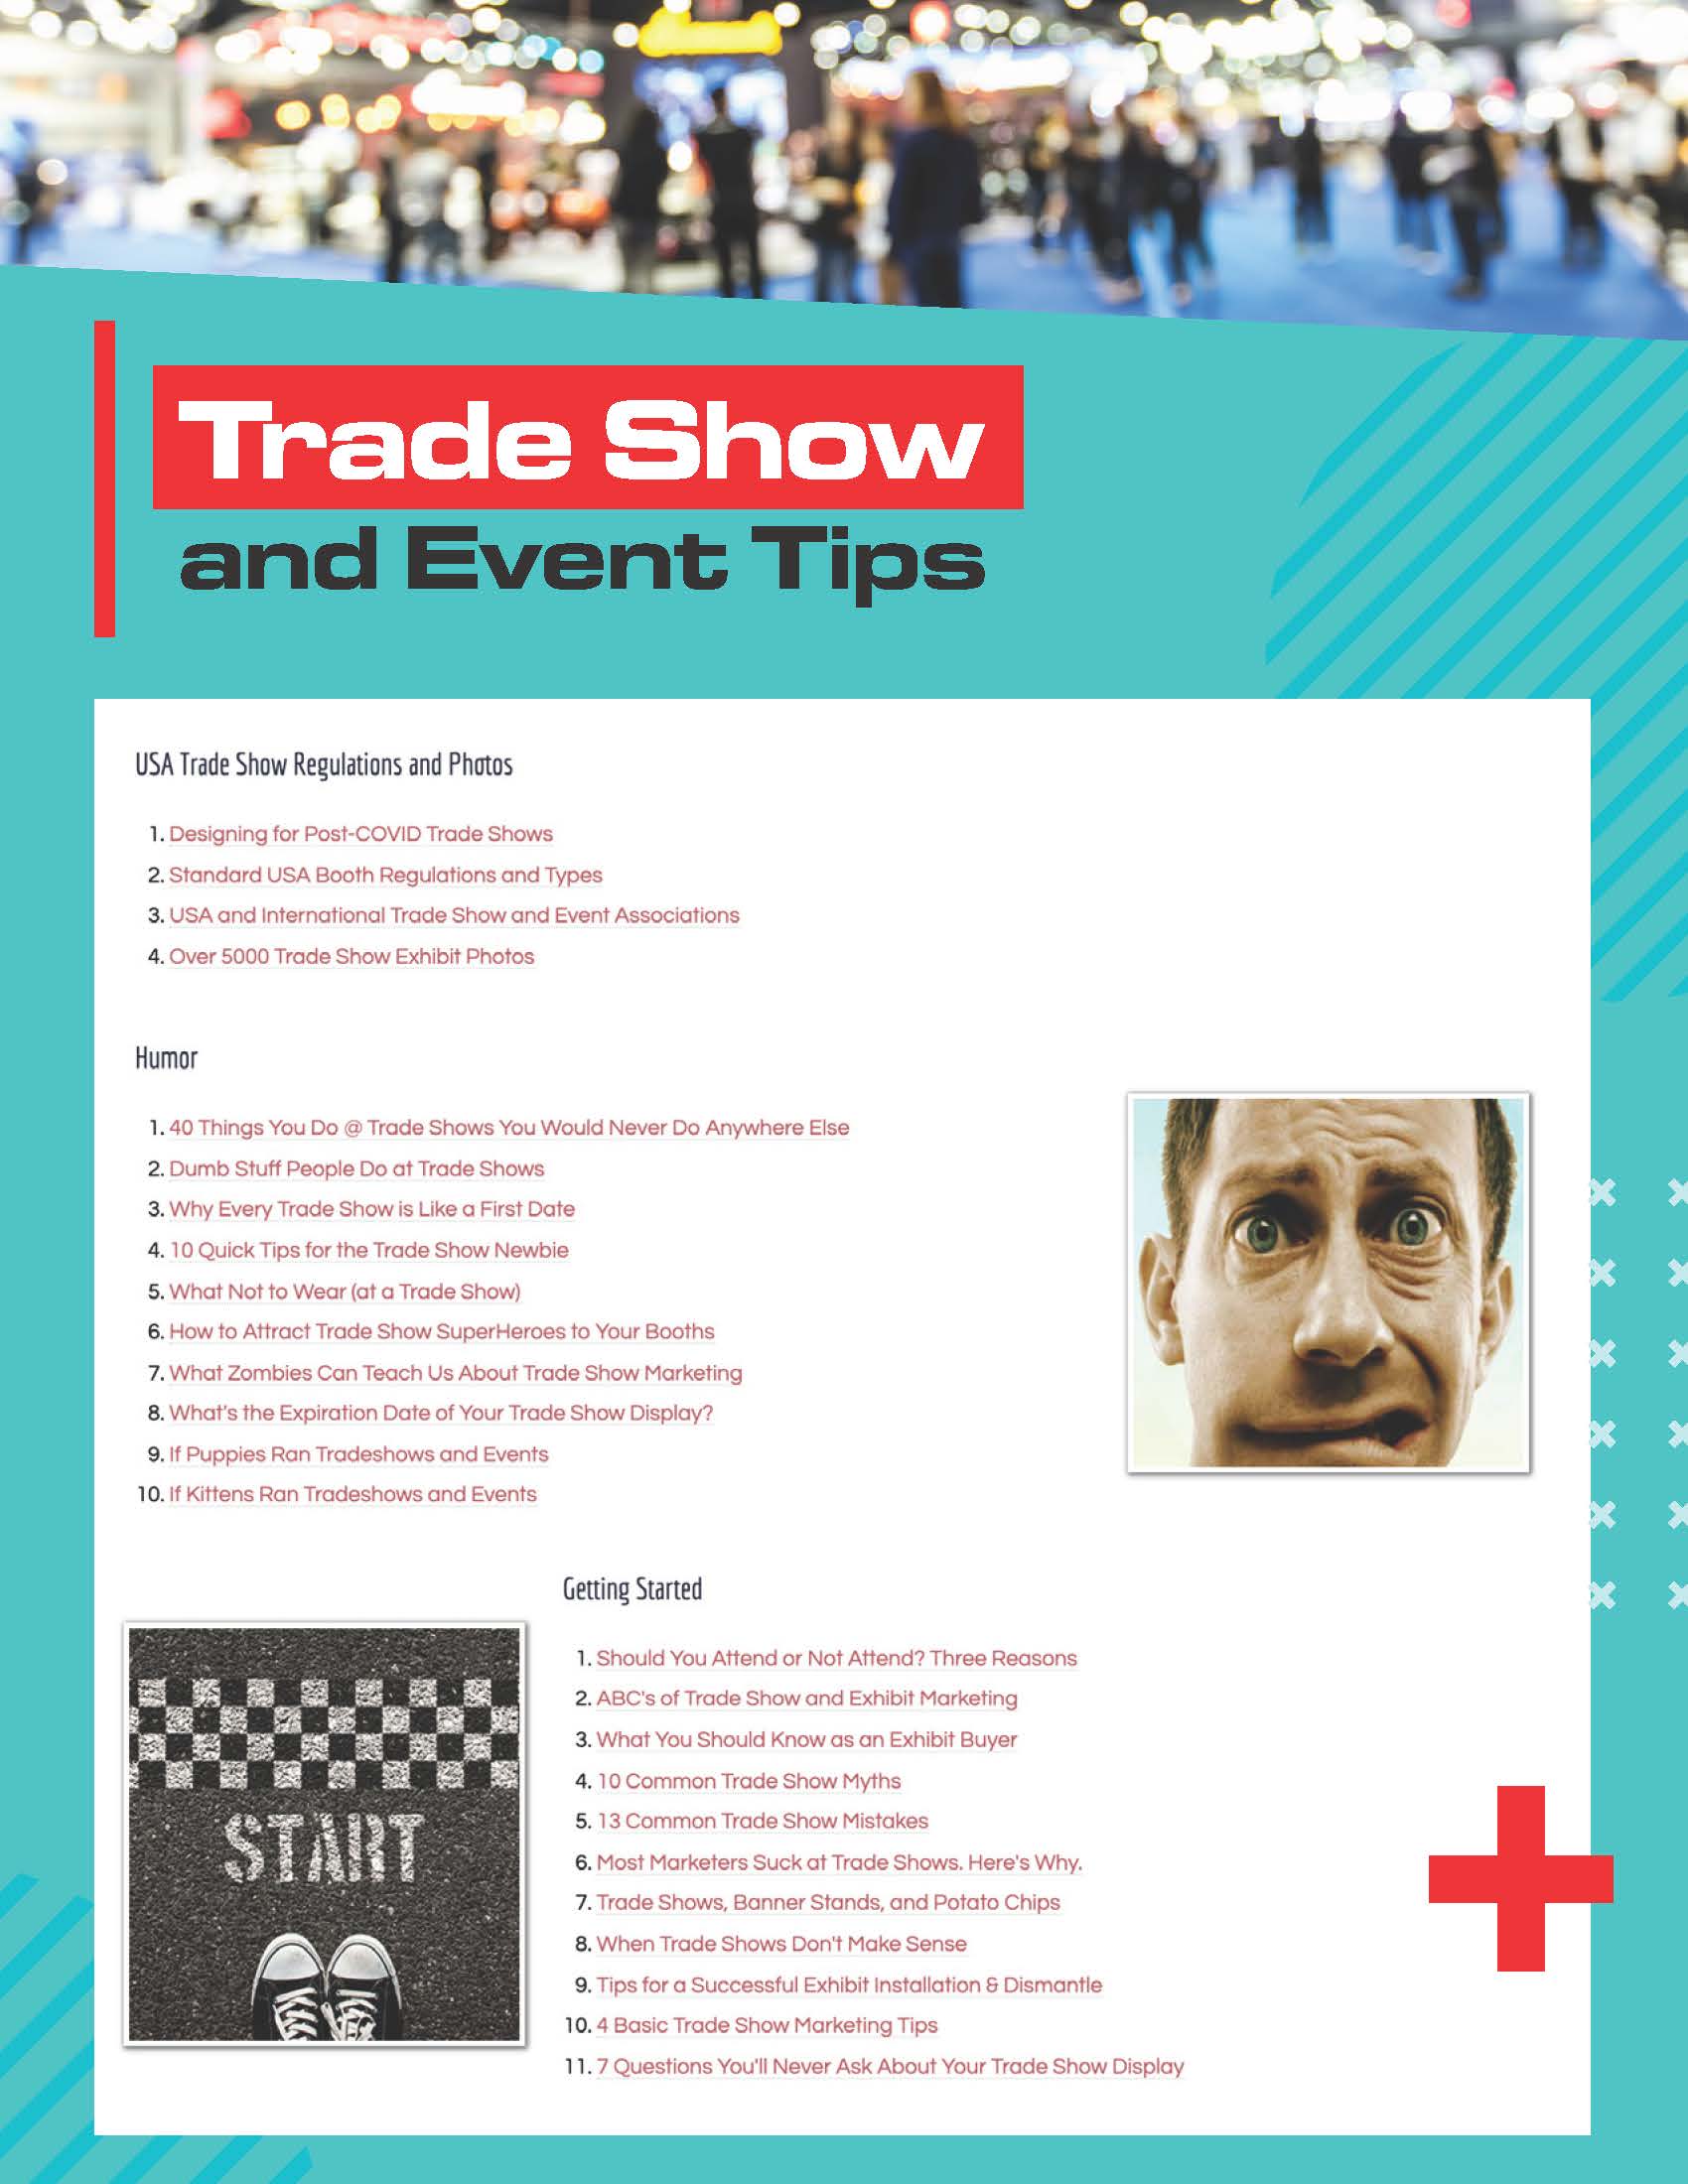 Trade Show and Event Tips